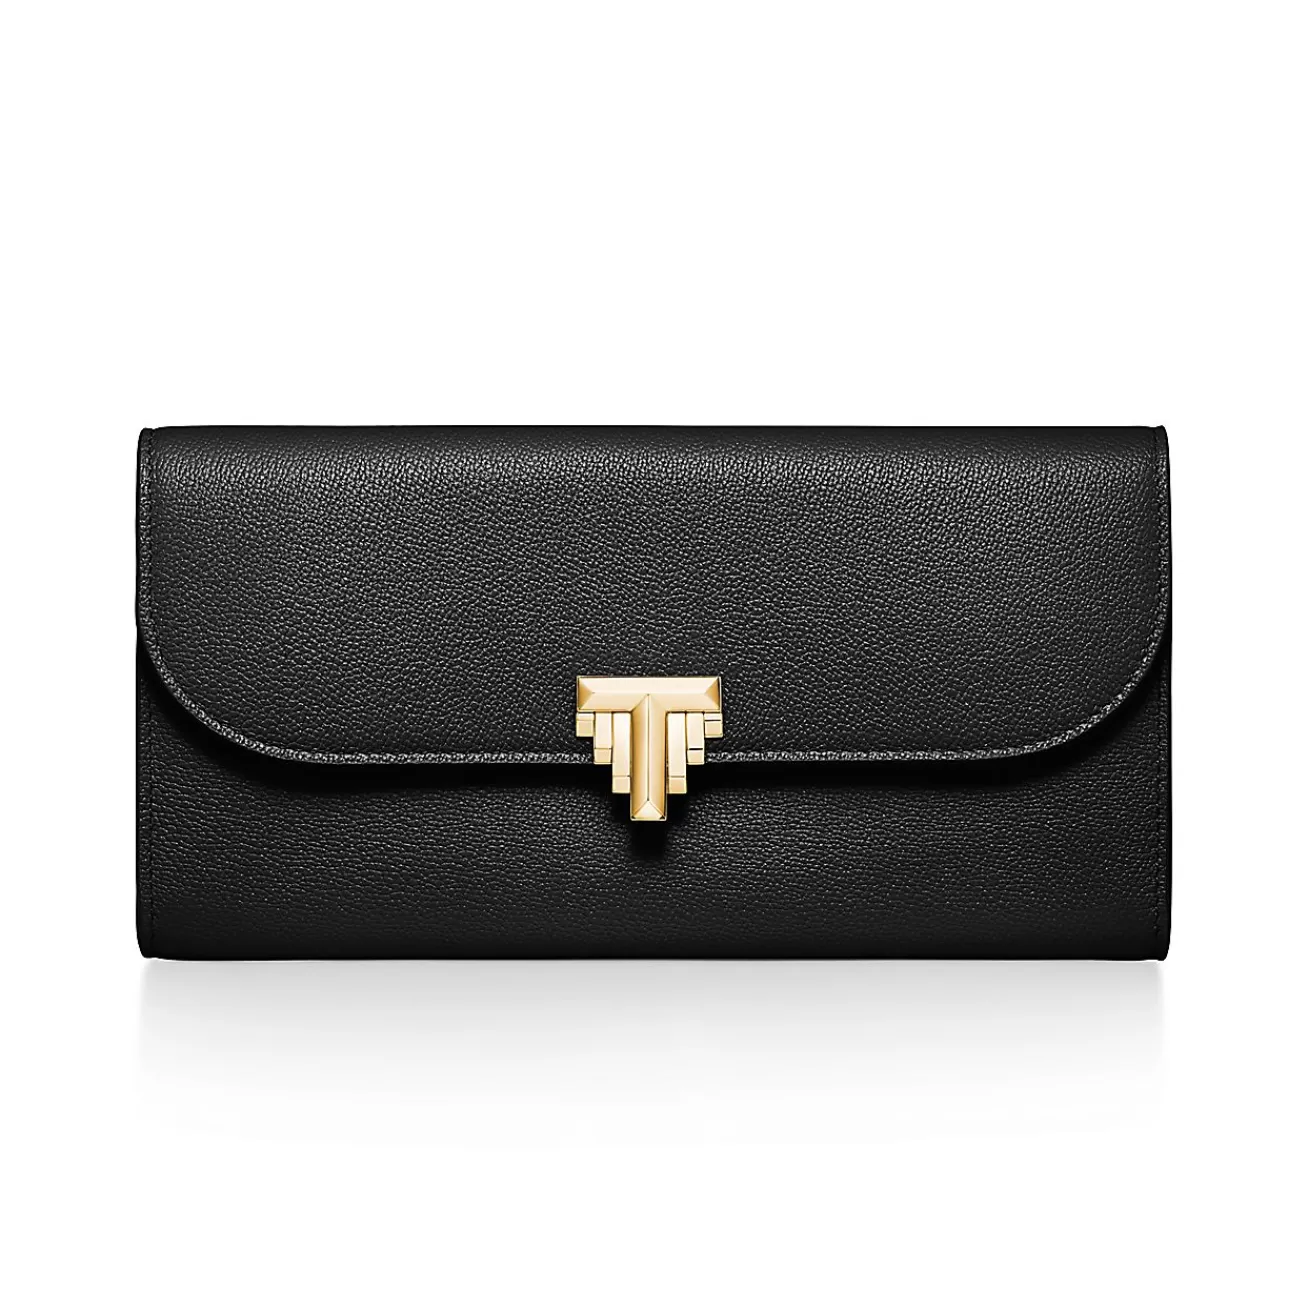 Tiffany & Co. Tiffany T Deco Continental Wallet in Black Leather | ^Women Small Leather Goods | Women's Accessories